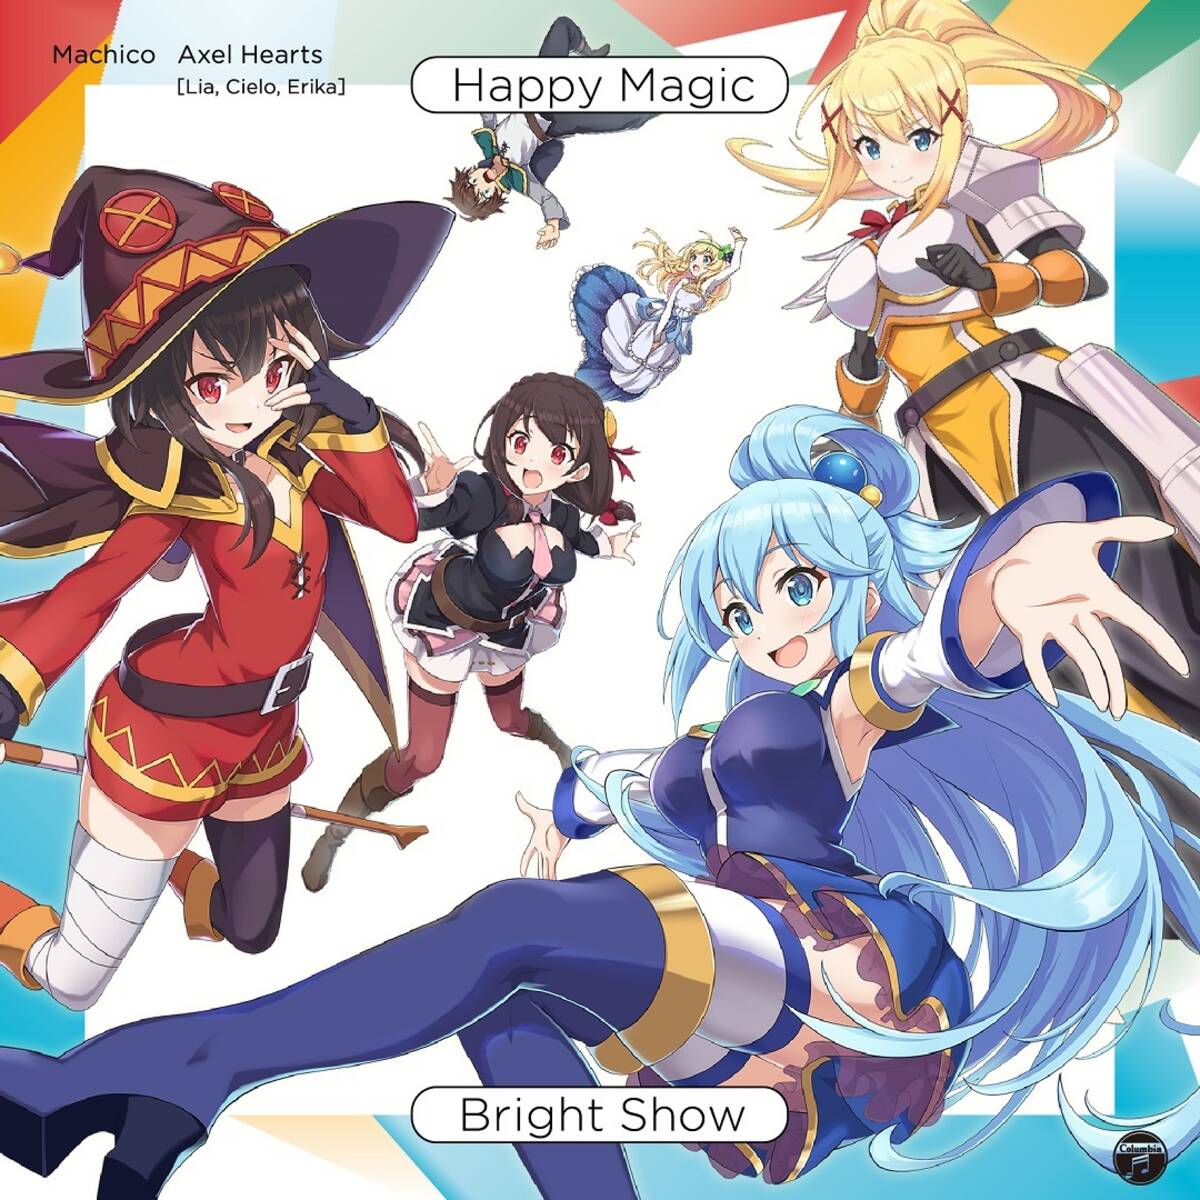 Cover for『Machico - Happy Magic』from the release『Happy Magic/Bright Show』